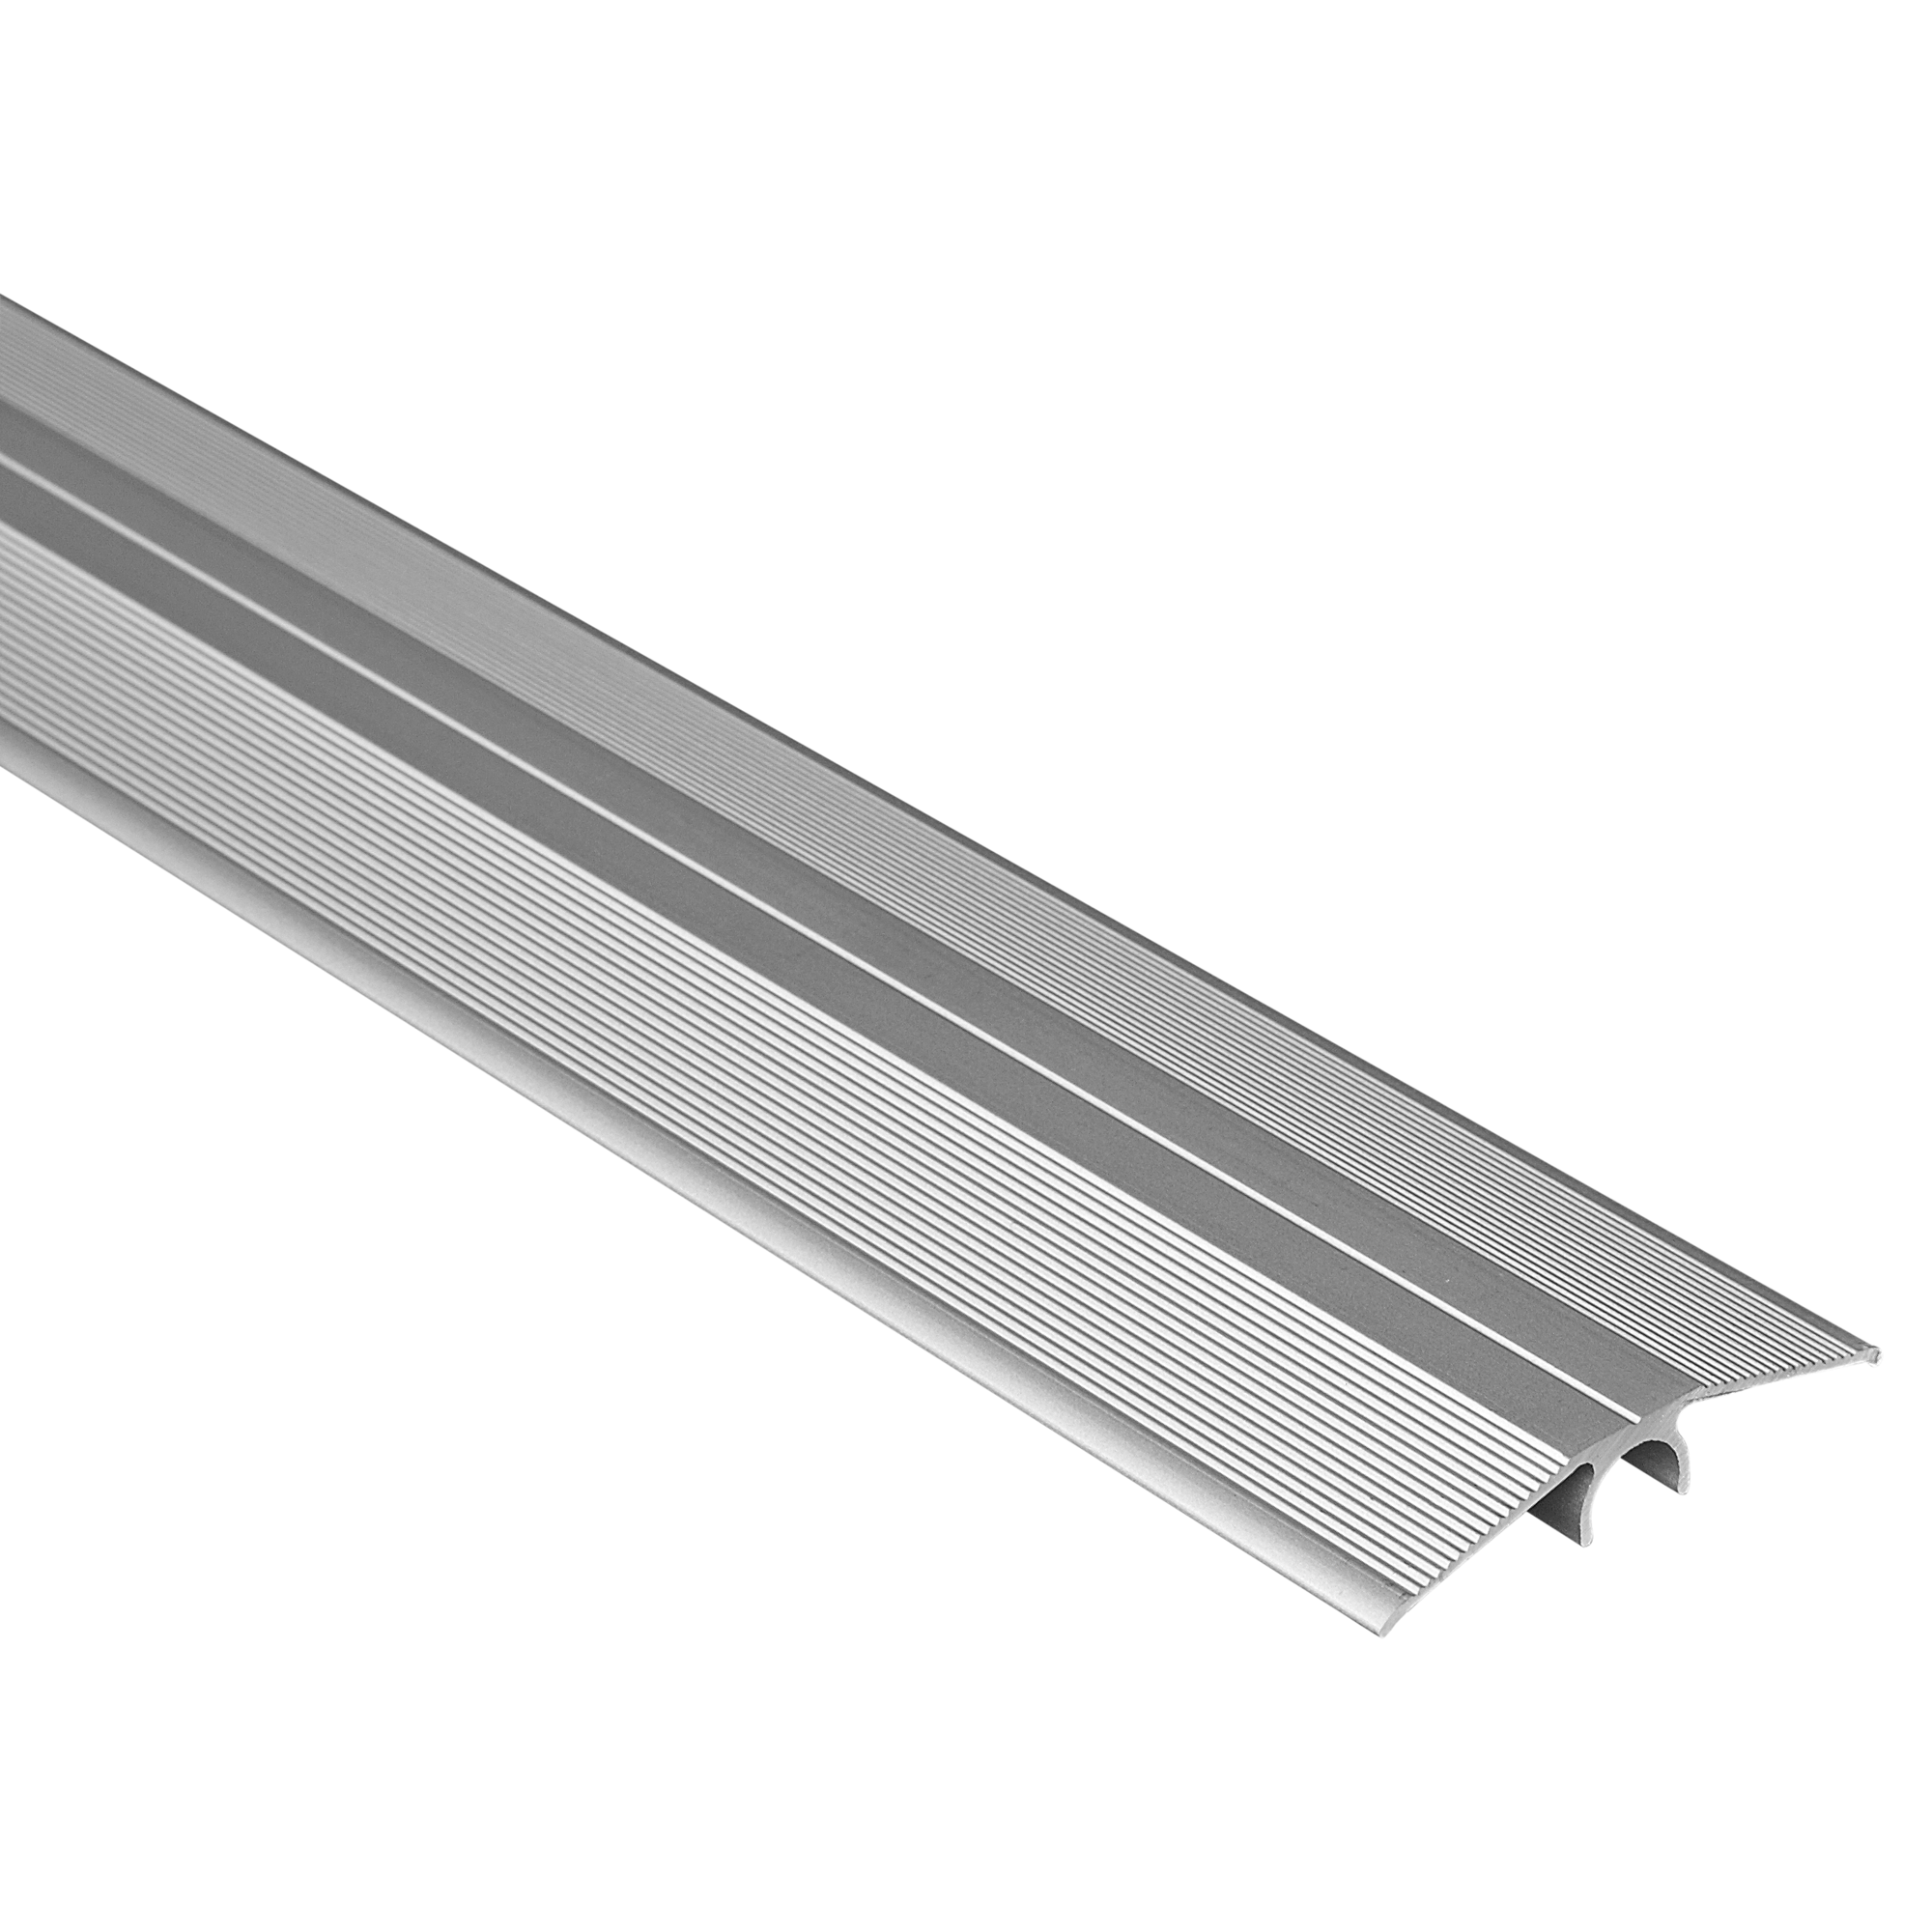 Übergangsprofil 'clipstech®' silber 1000 x 46 mm + product picture